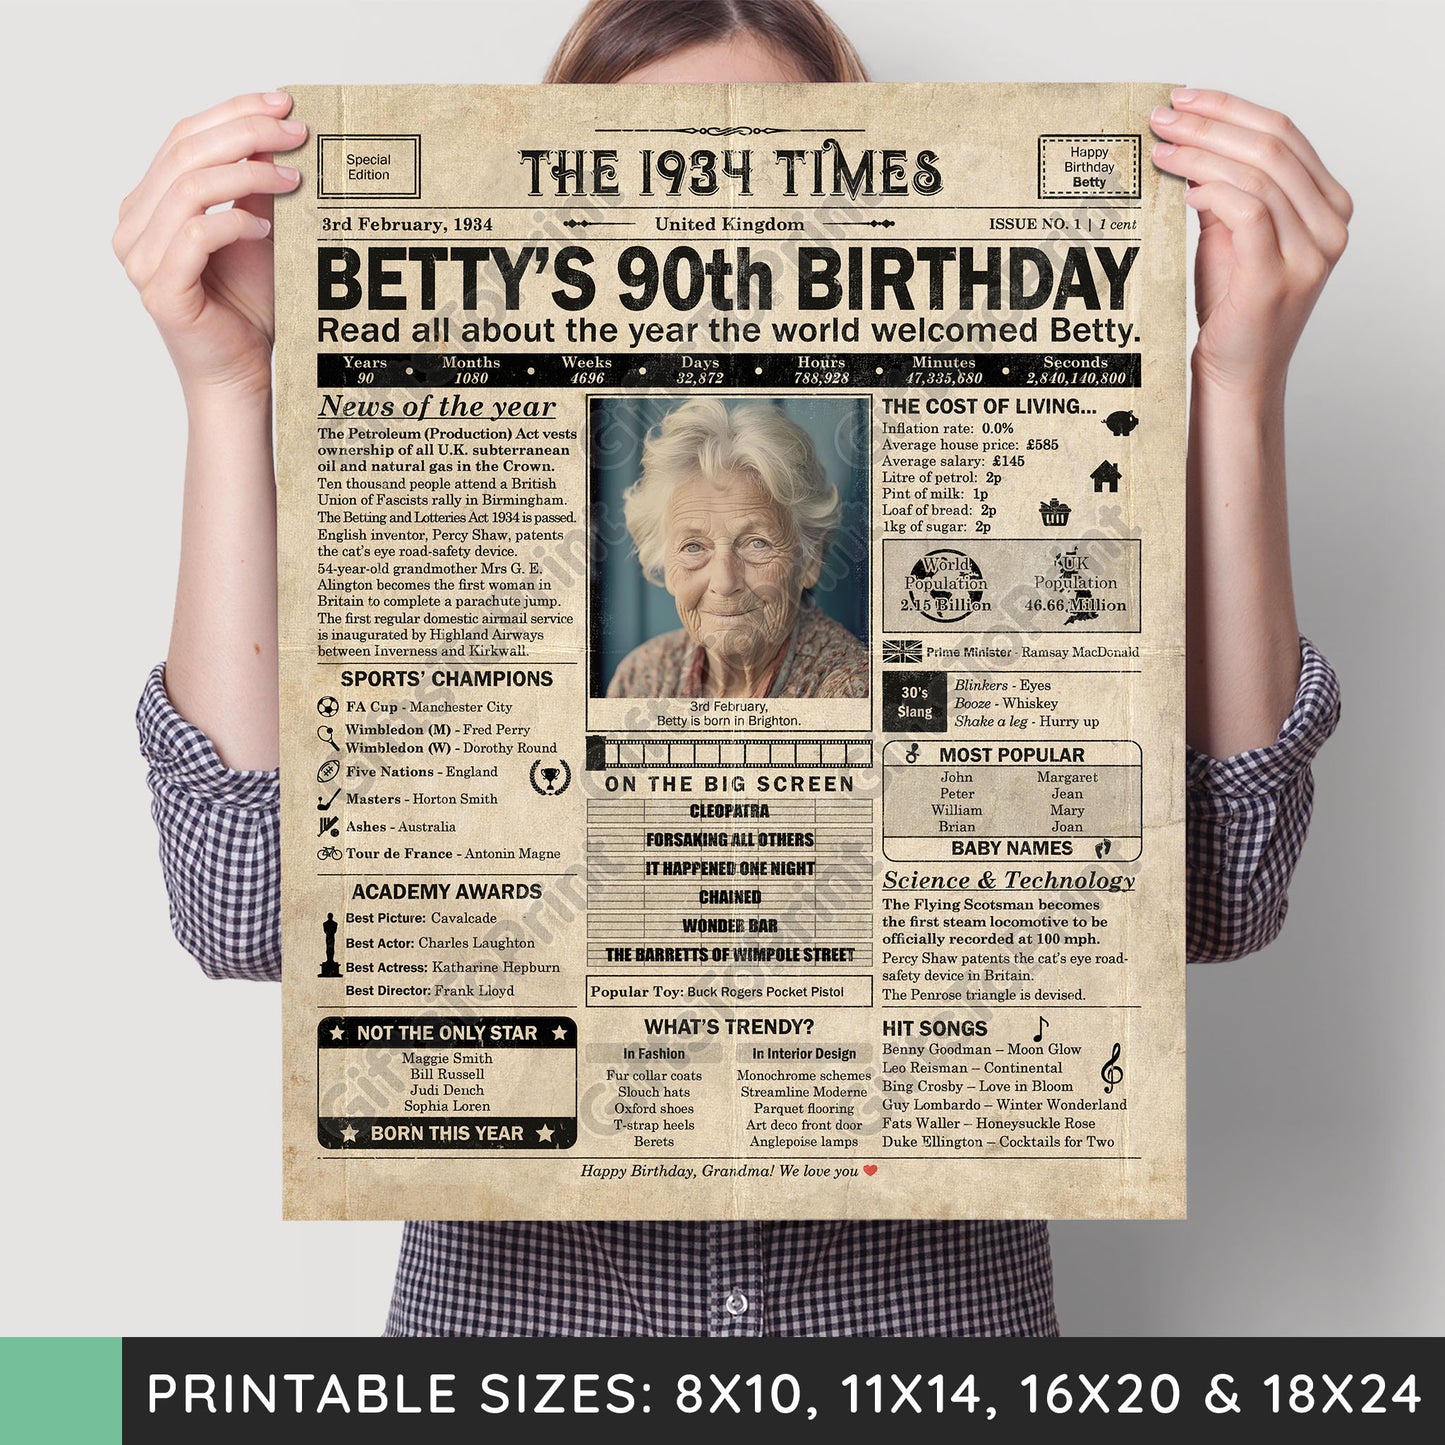 Personalised 90th Birthday Gift: A Printable UK Birthday Poster of 1934